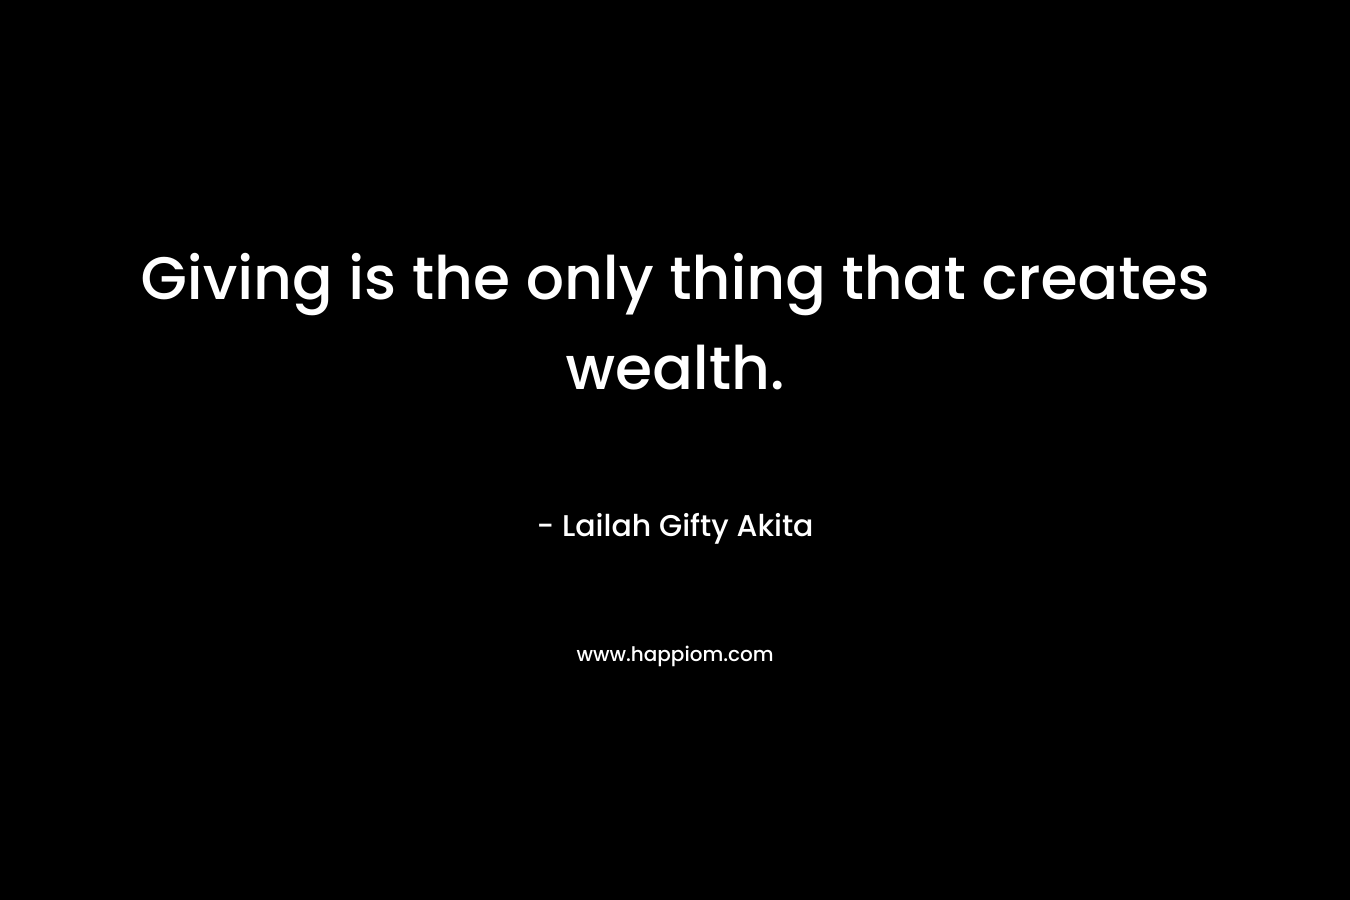 Giving is the only thing that creates wealth.